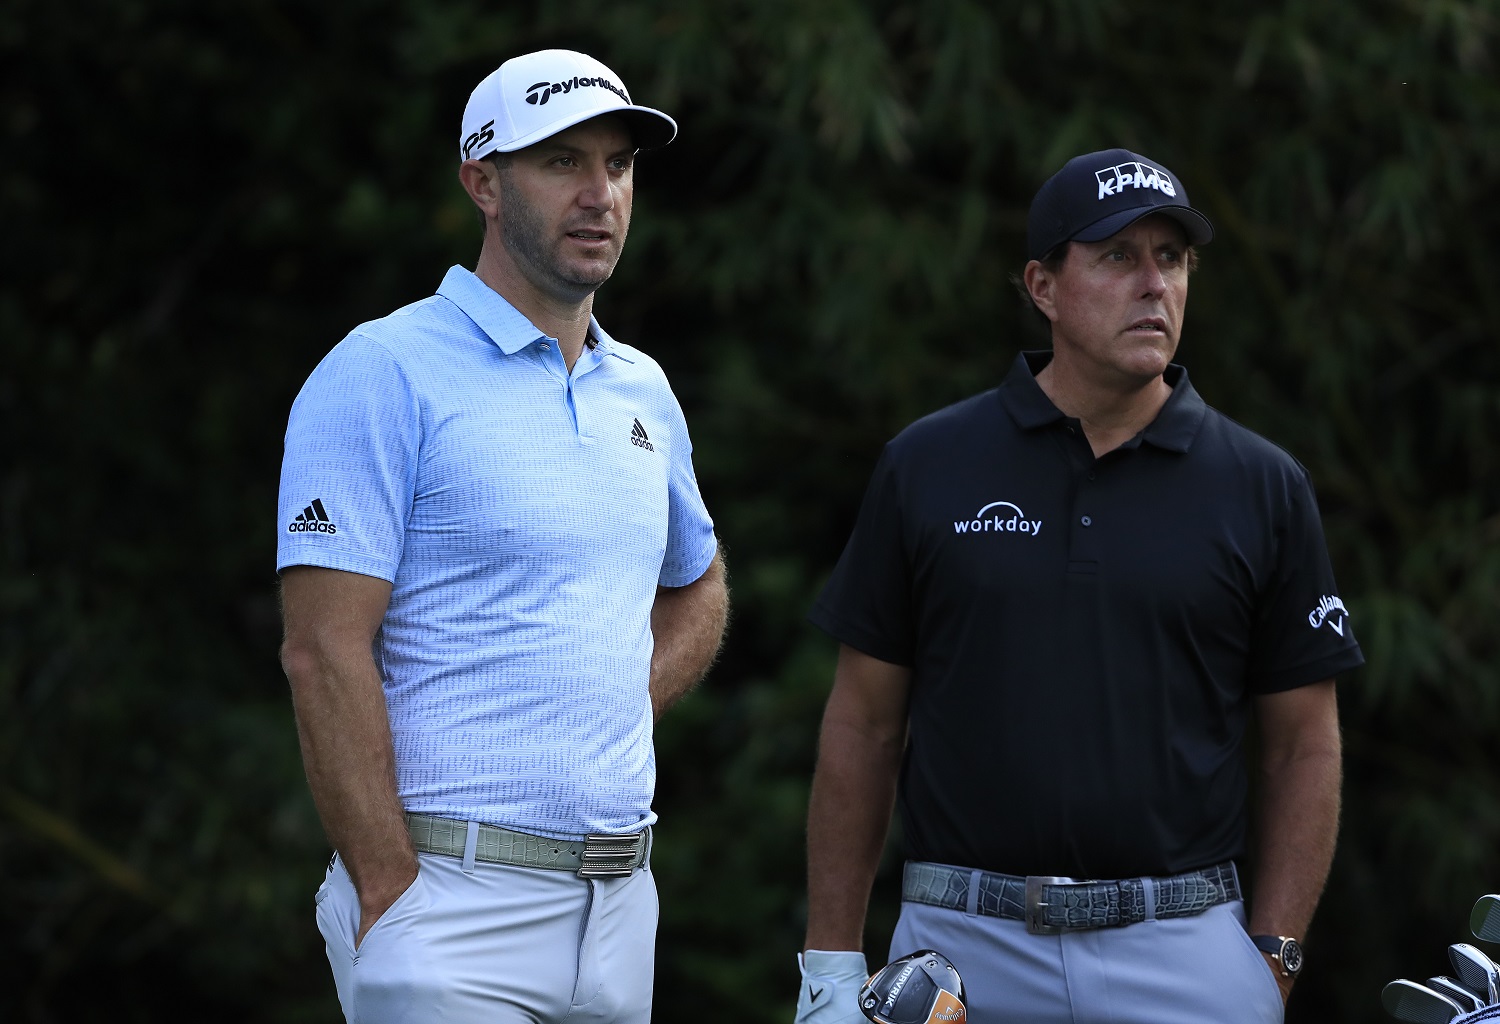 Phil Mickelson of the United States waits with Dustin Johnson of the United States during The Players Championship on The Stadium Course at TPC Sawgrass on March 12, 2020. | Cliff Hawkins/Getty Images